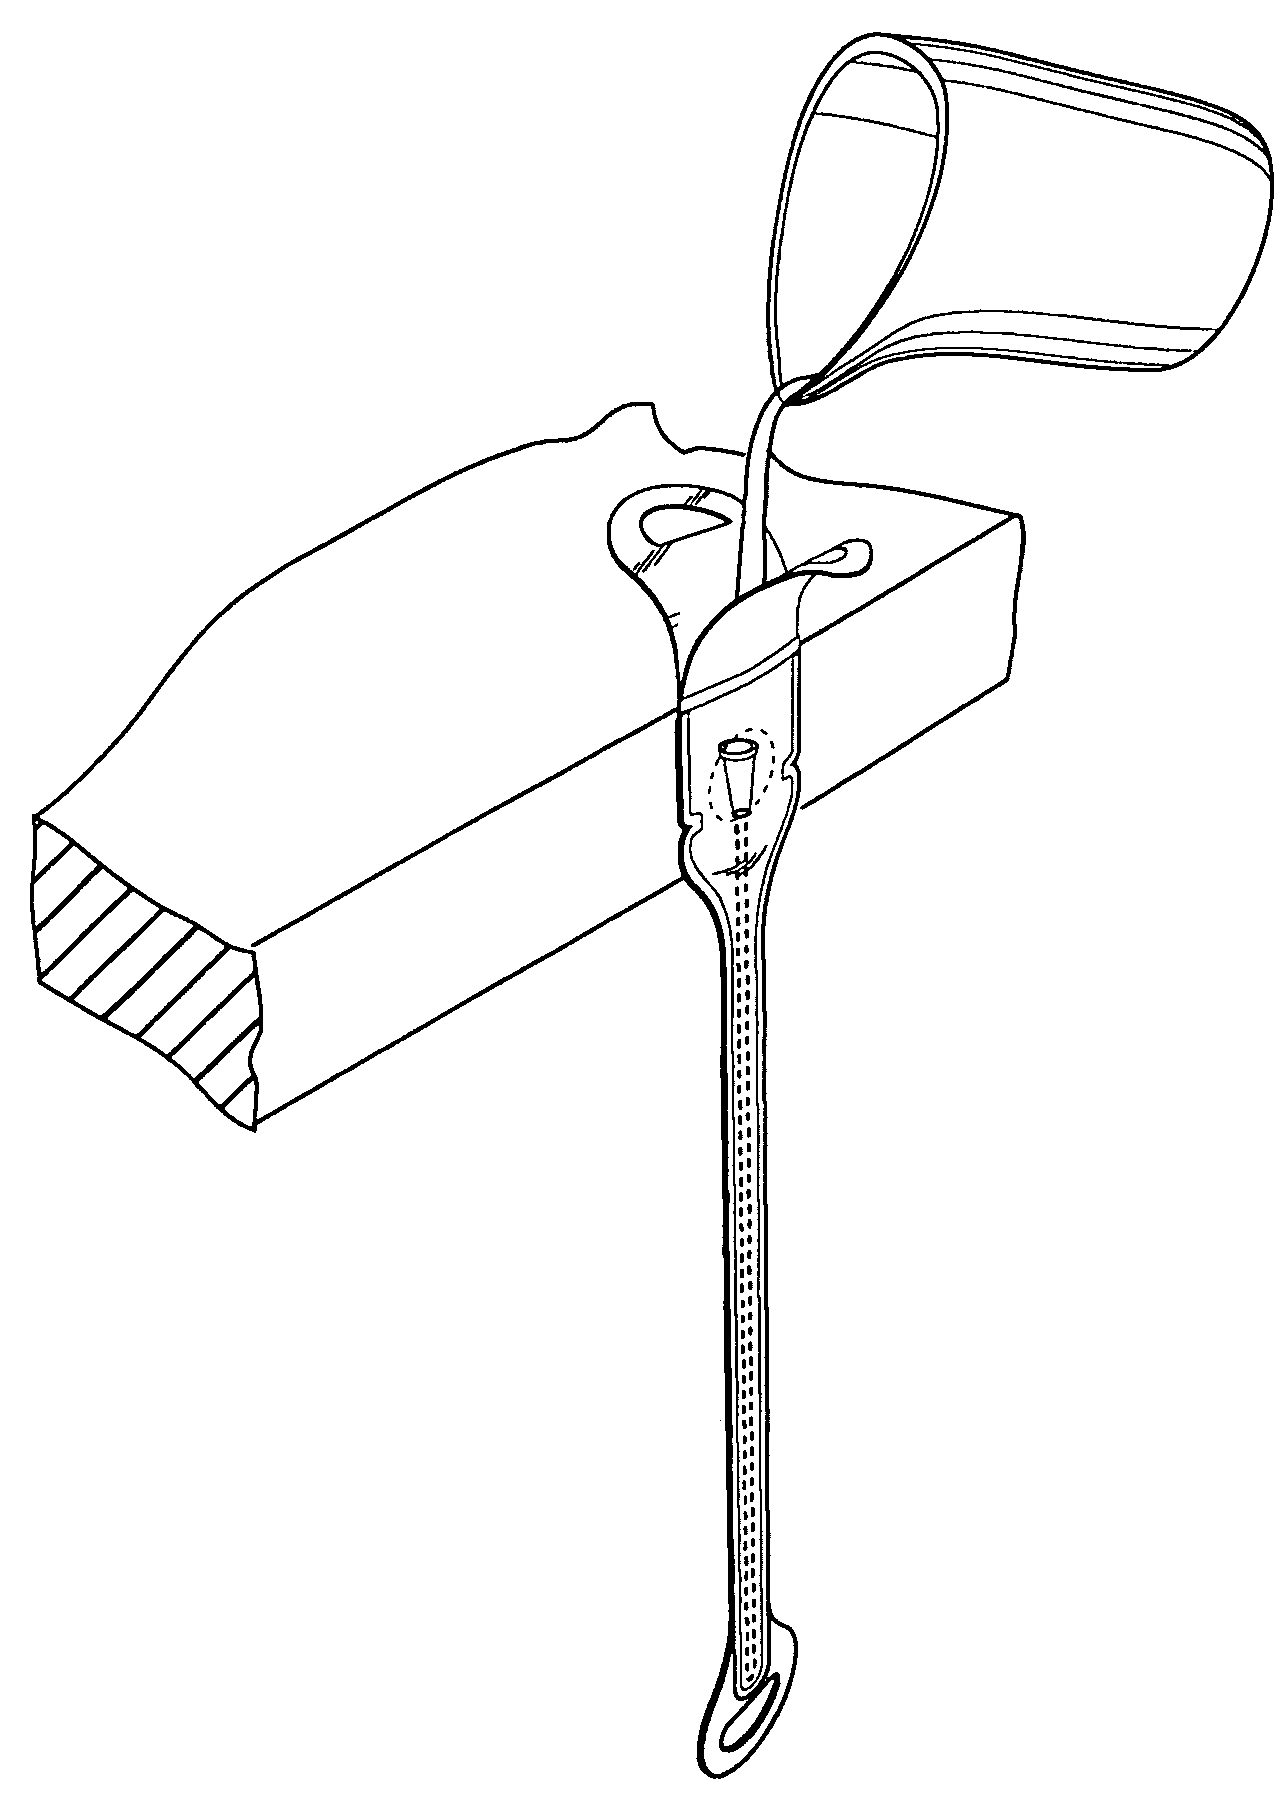 Folded Catheter Assembly With Adhesive Grip